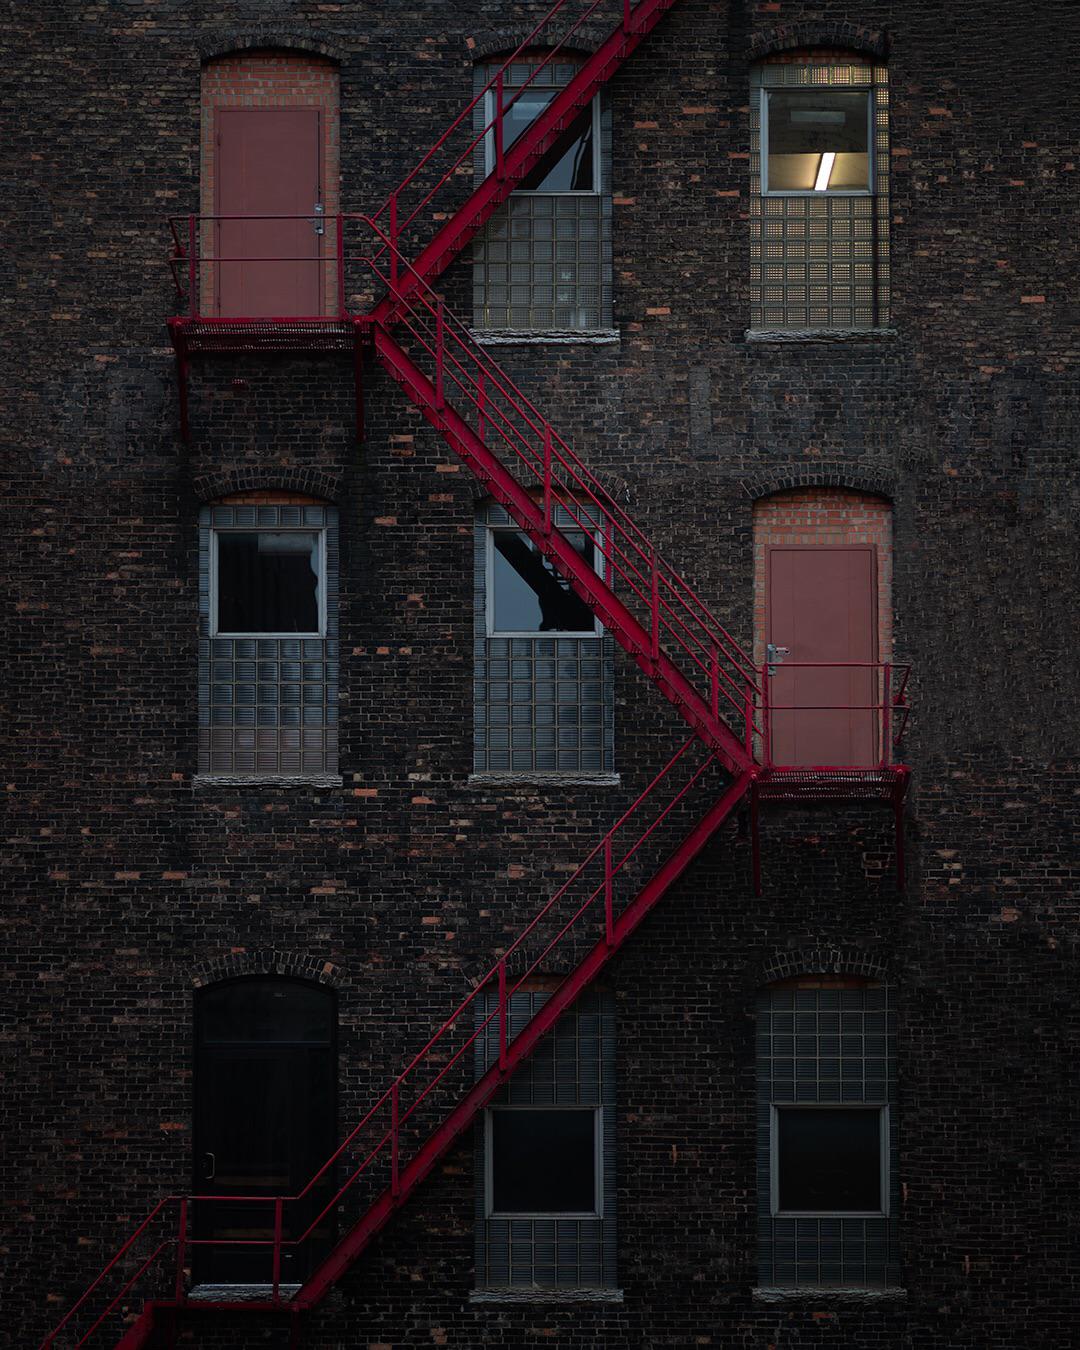 ITAP of a red staircase.